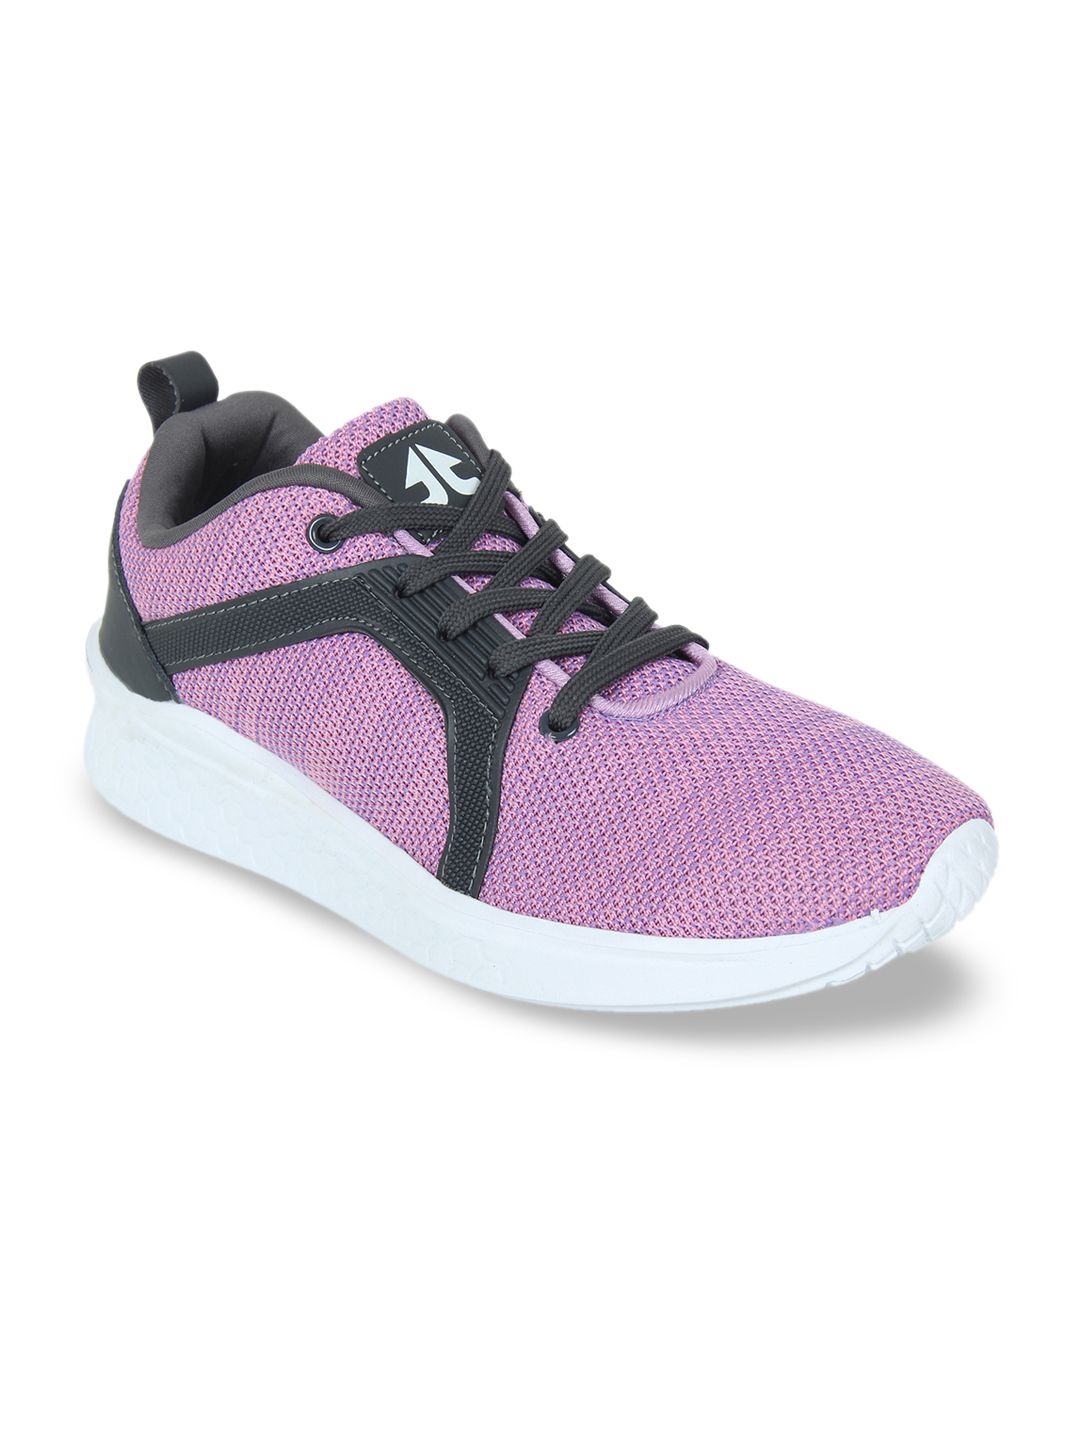 OFF LIMITS Women Pink Mesh Running Shoes Price in India